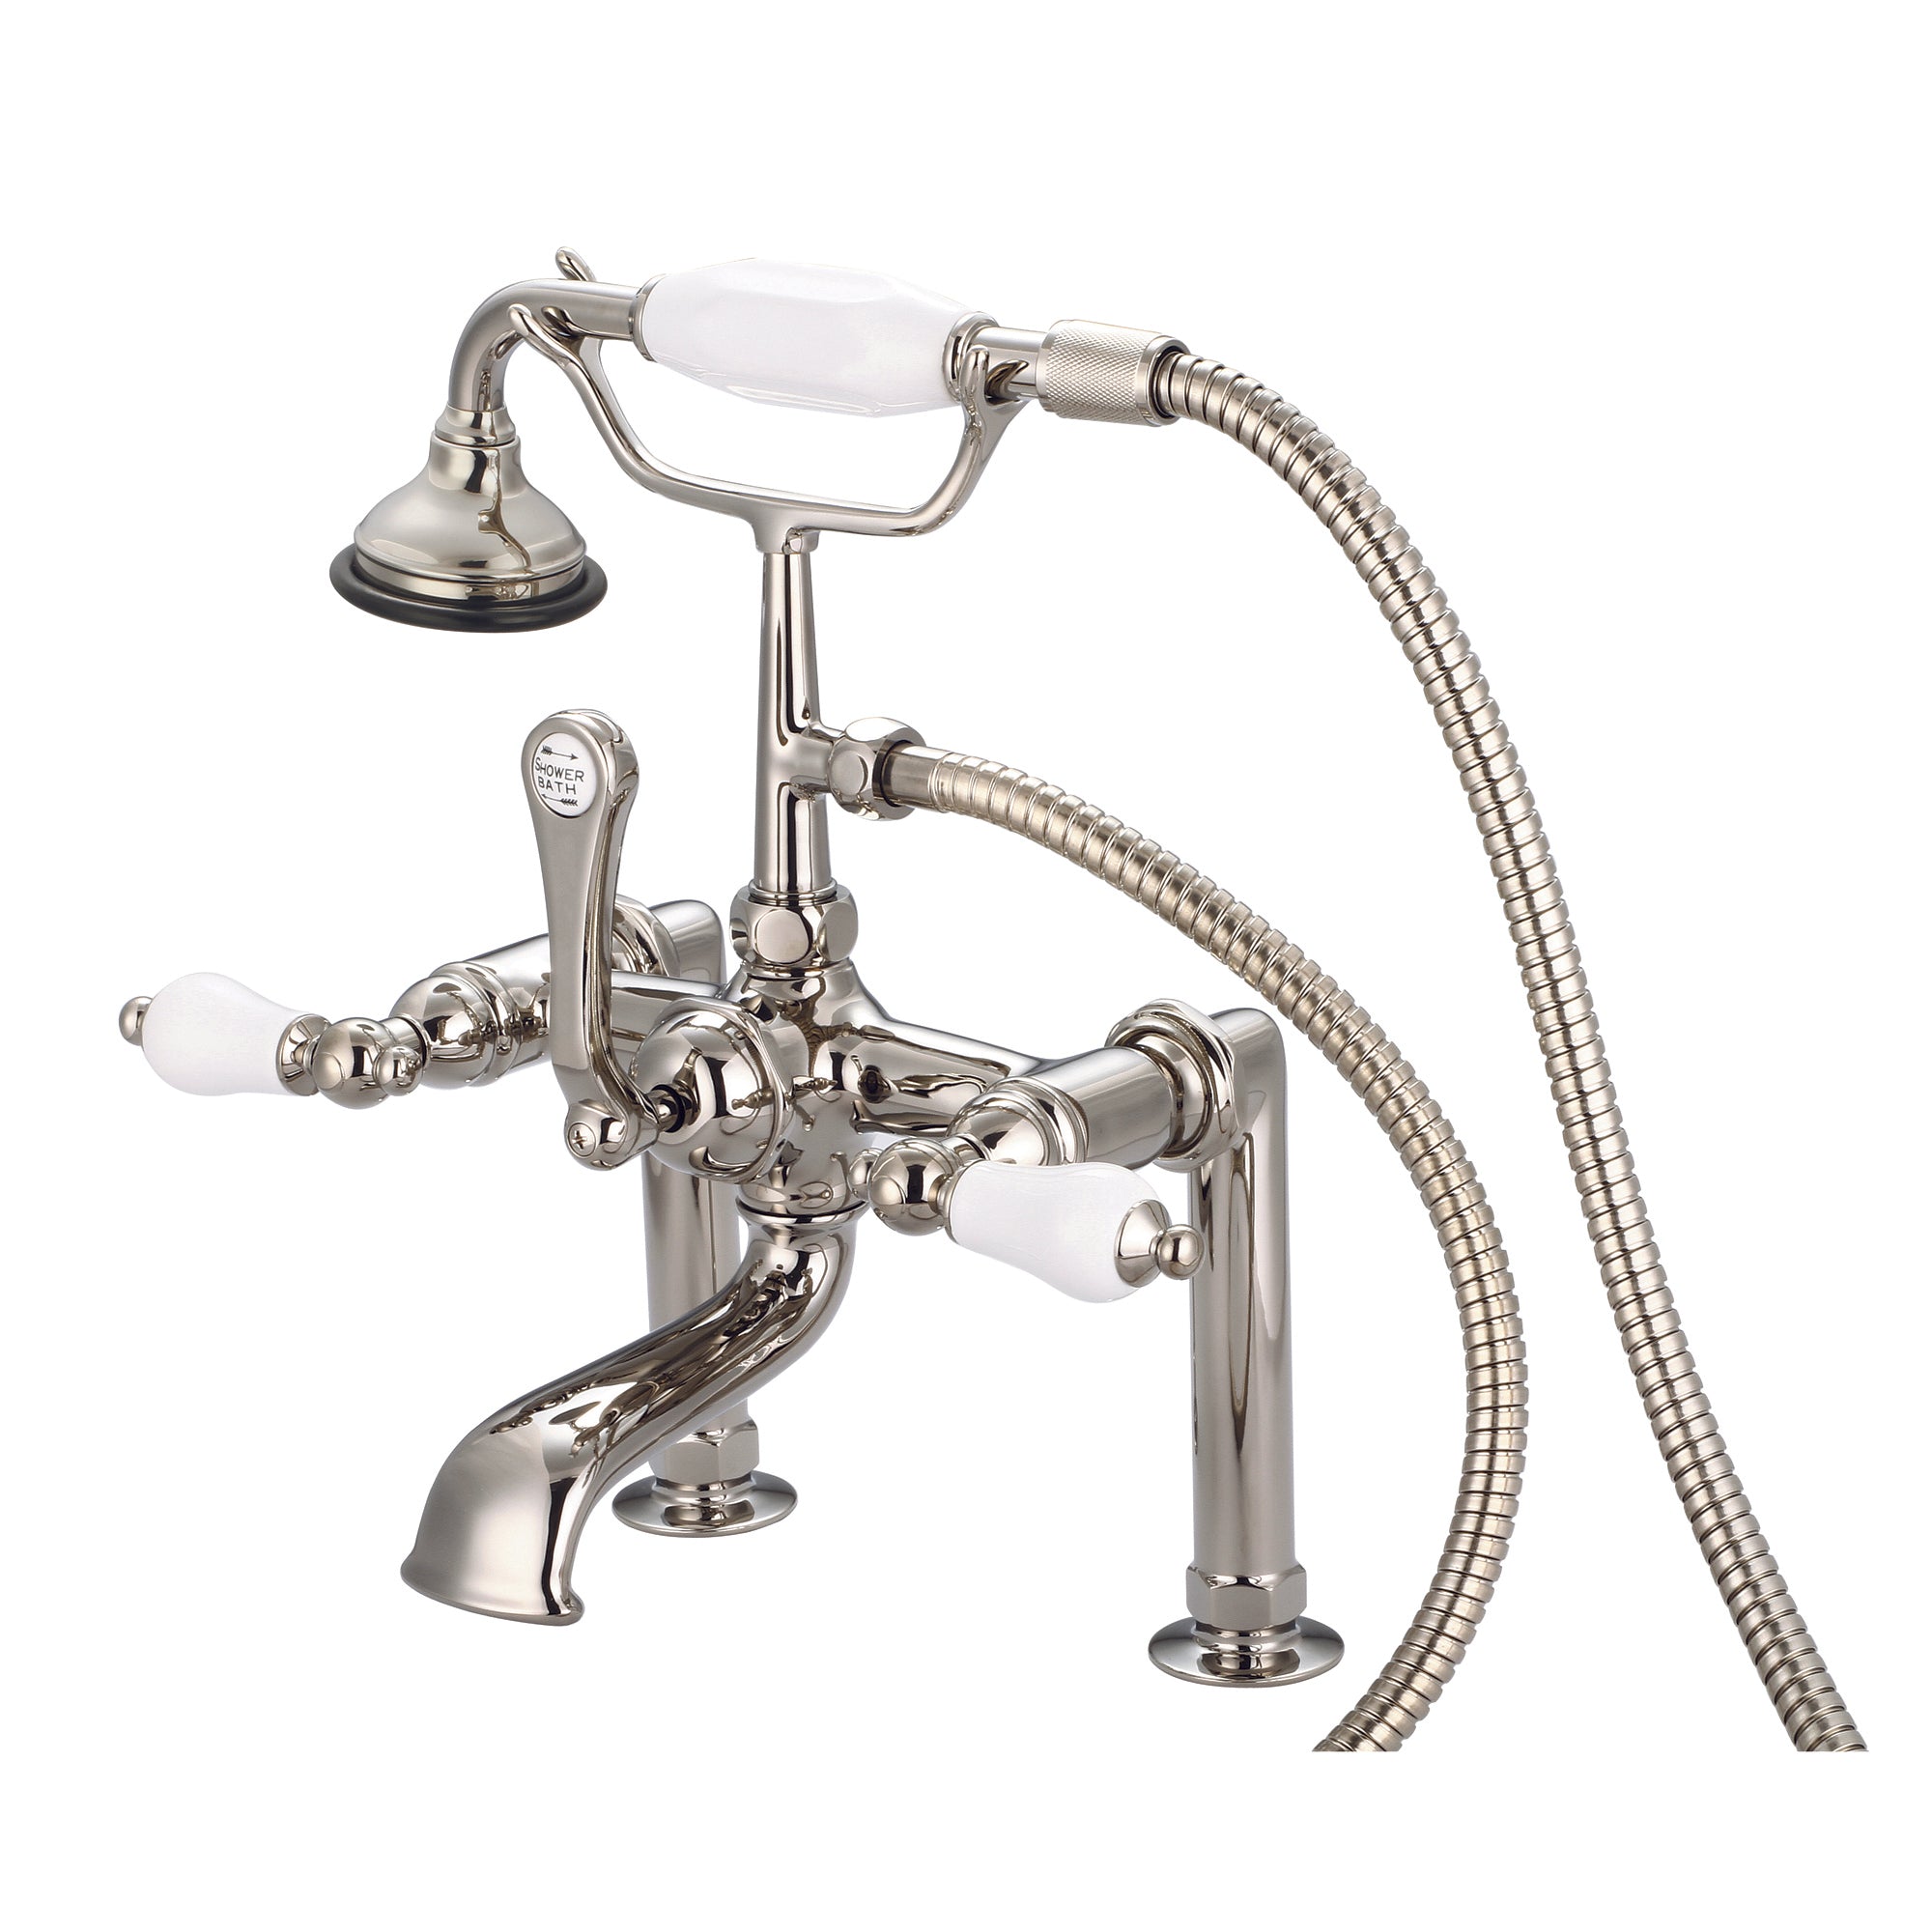 Water Creation | Vintage Classic 7 Inch Spread Deck Mount Tub Faucet With 6 Inch Risers & Handheld Shower in Polished Nickel (PVD) Finish With Porcelain Lever Handles Without labels | F6-0006-05-PL